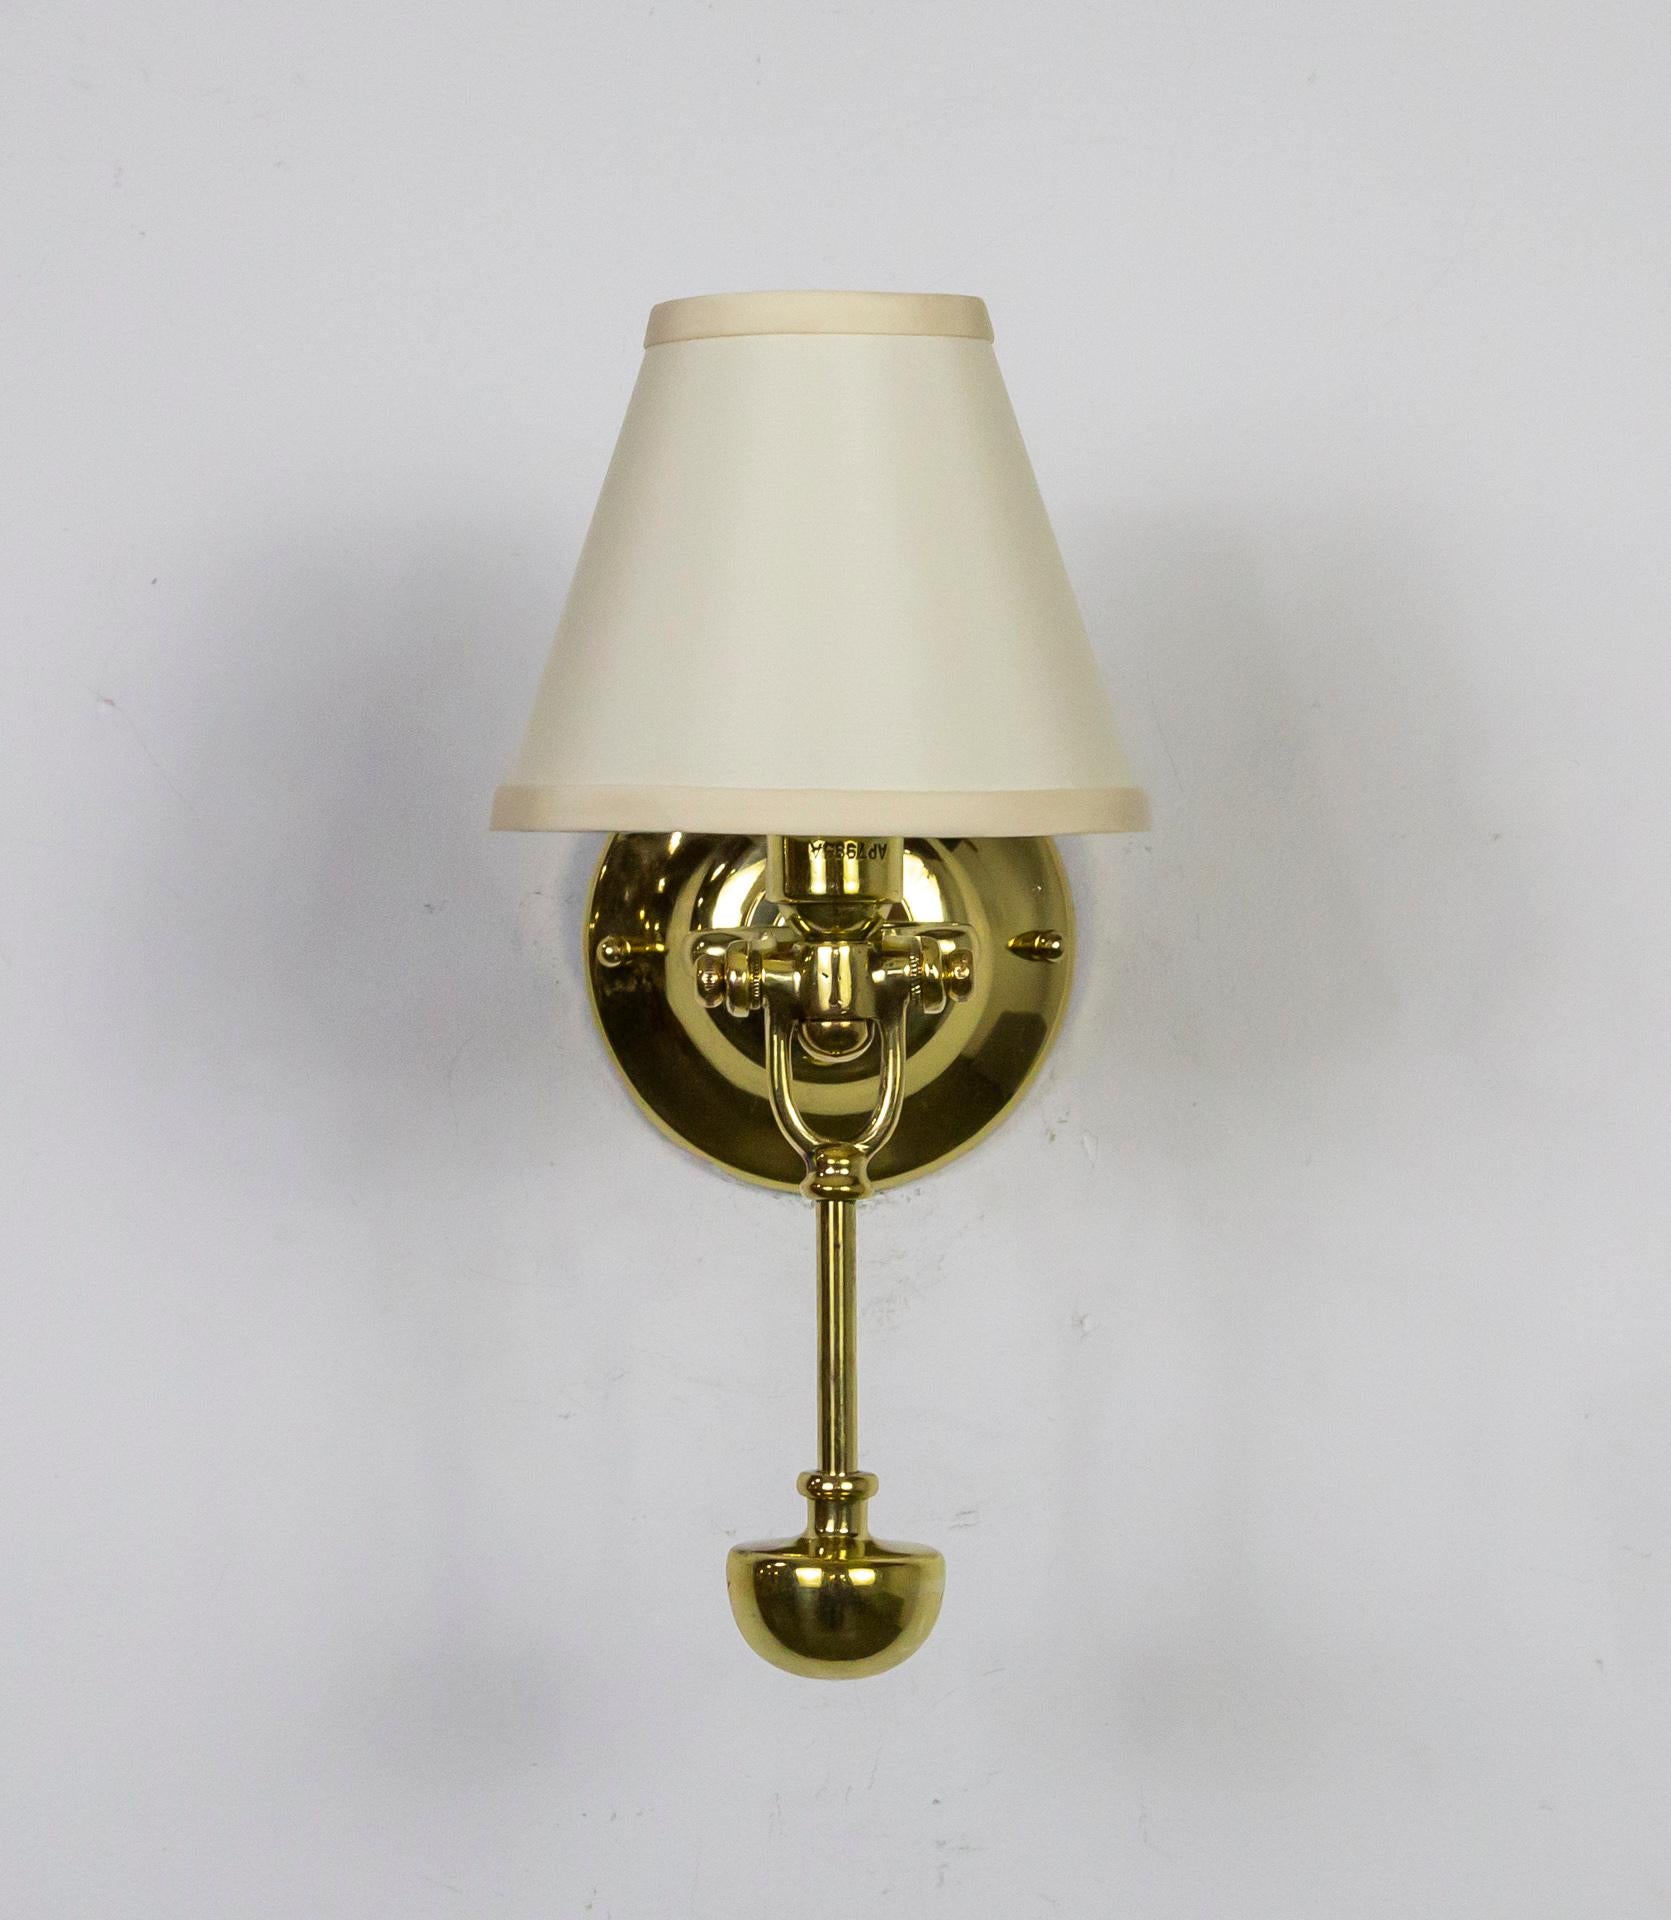 A pair of nautical, candlestick style sconces from the late 19th century. Made of solid brass in Britain as gimbal wall lights for a ship. Sold with ivory colored silk, hard-back, empire shades. Newly wired, buffed and polished. The gimbal action